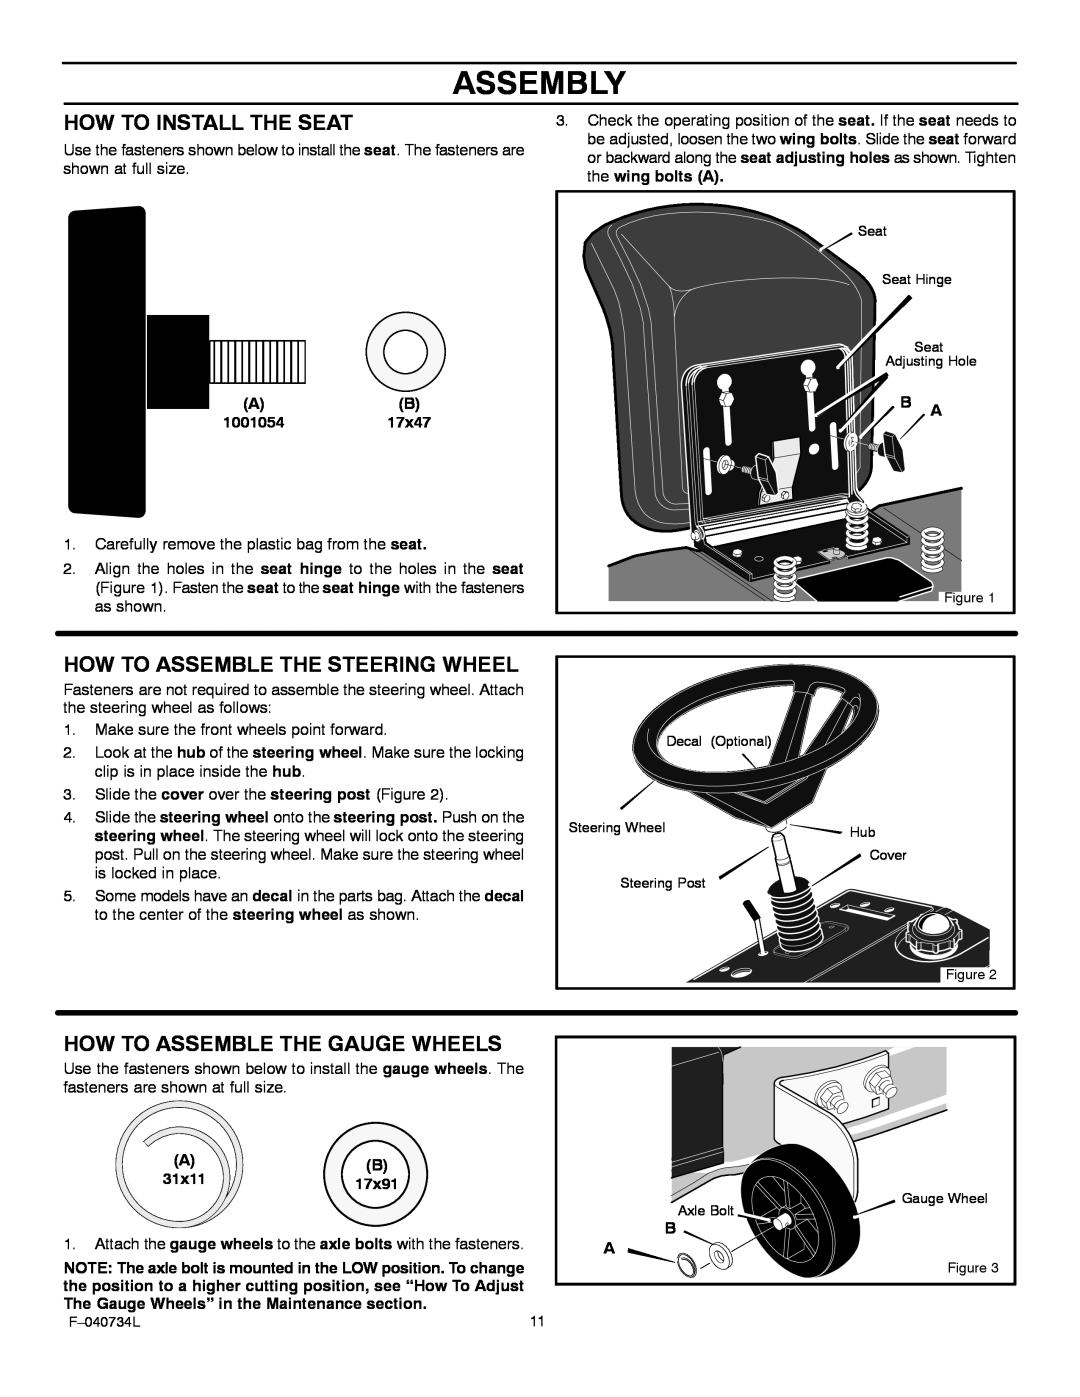 Murray 425015x92A Assembly, How To Install The Seat, How To Assemble The Steering Wheel, How To Assemble The Gauge Wheels 